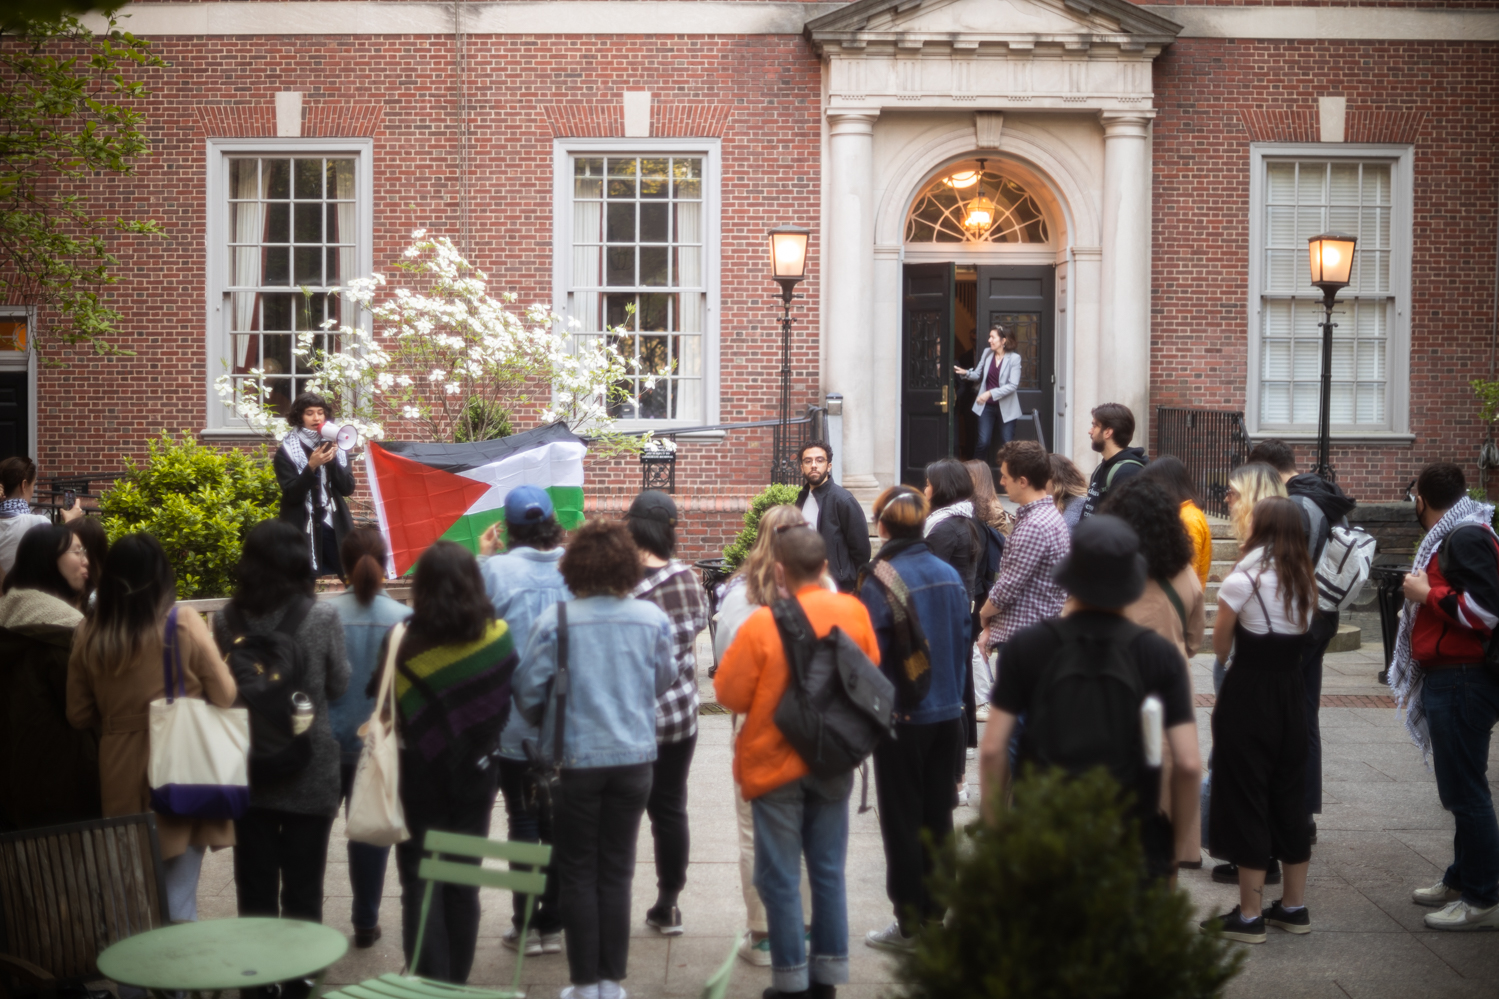 Members of the student group Law Students for Justice in Palestine protest in the Vanderbilt Hall courtyard. A Palestinian flag is being flown in the background.